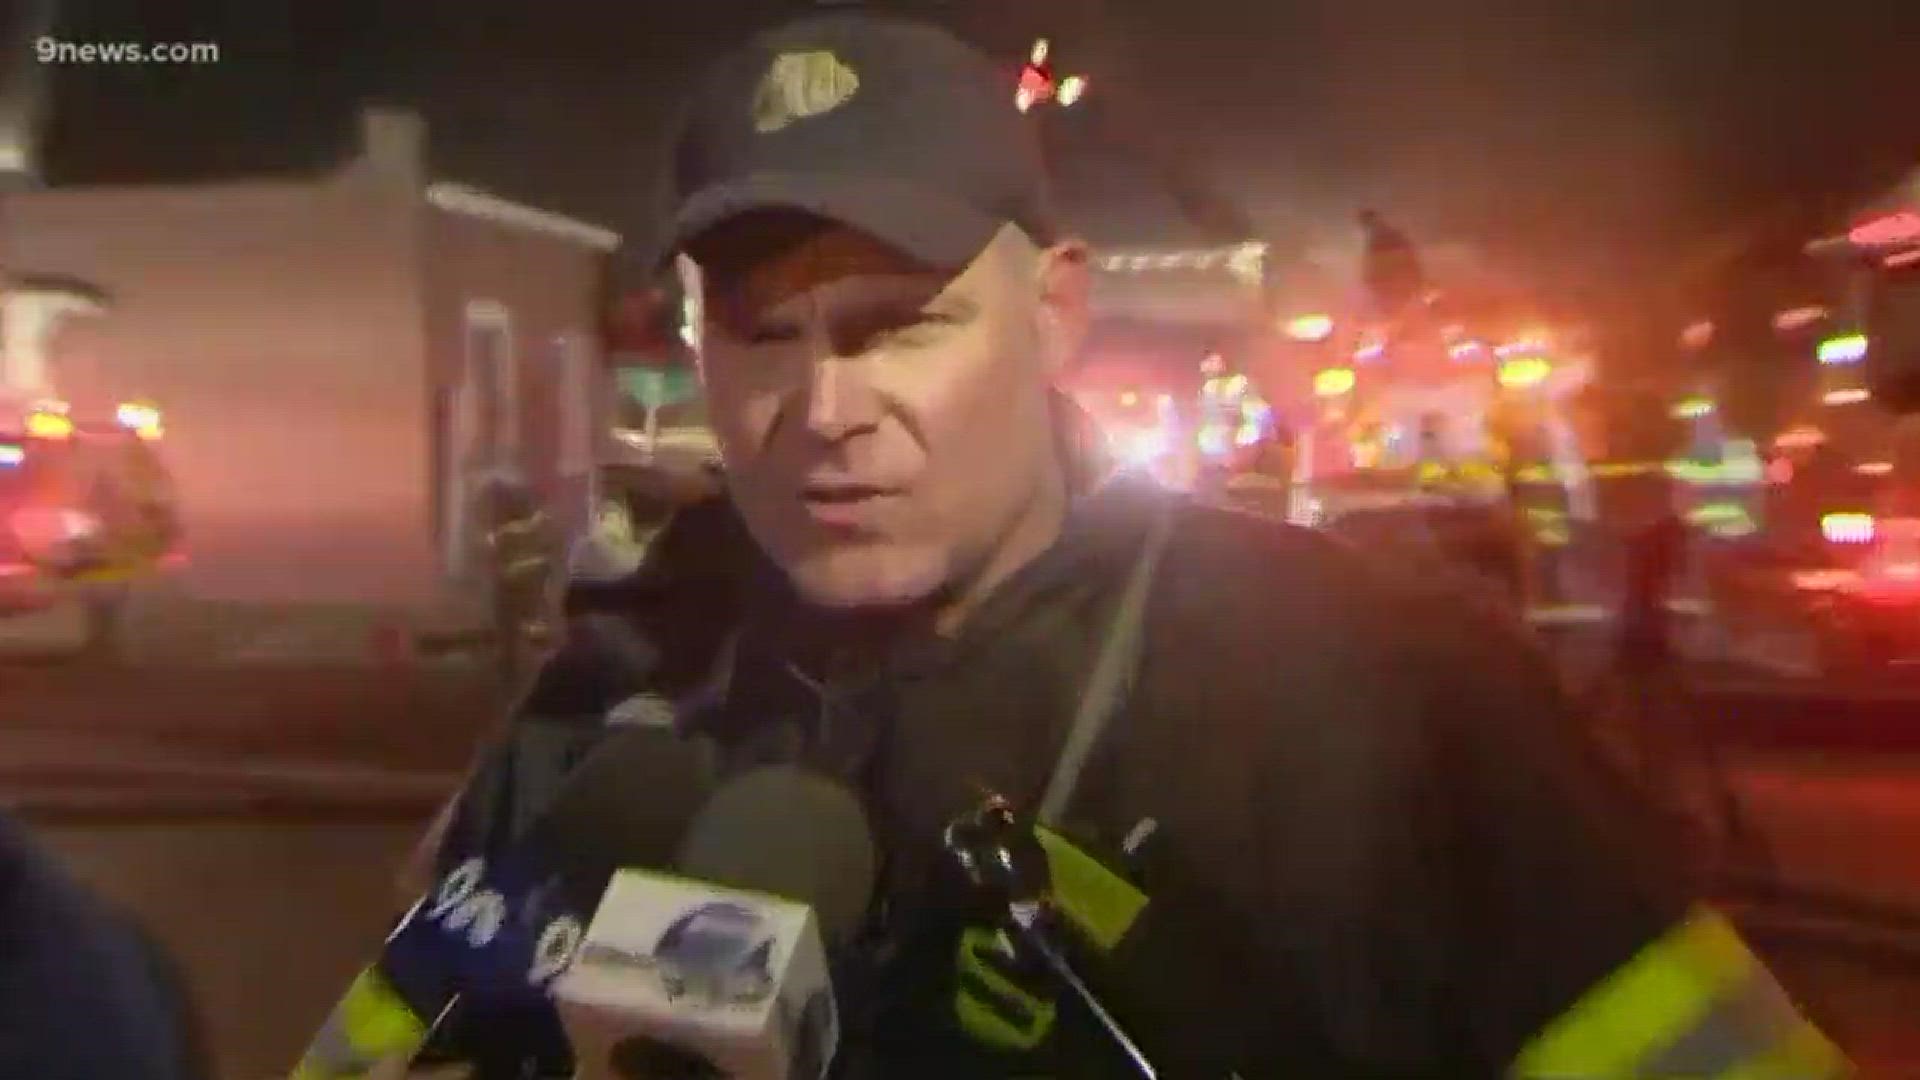 A spokesperson for Denver Fire provided an update on the fire near 4th and Santa Fe.